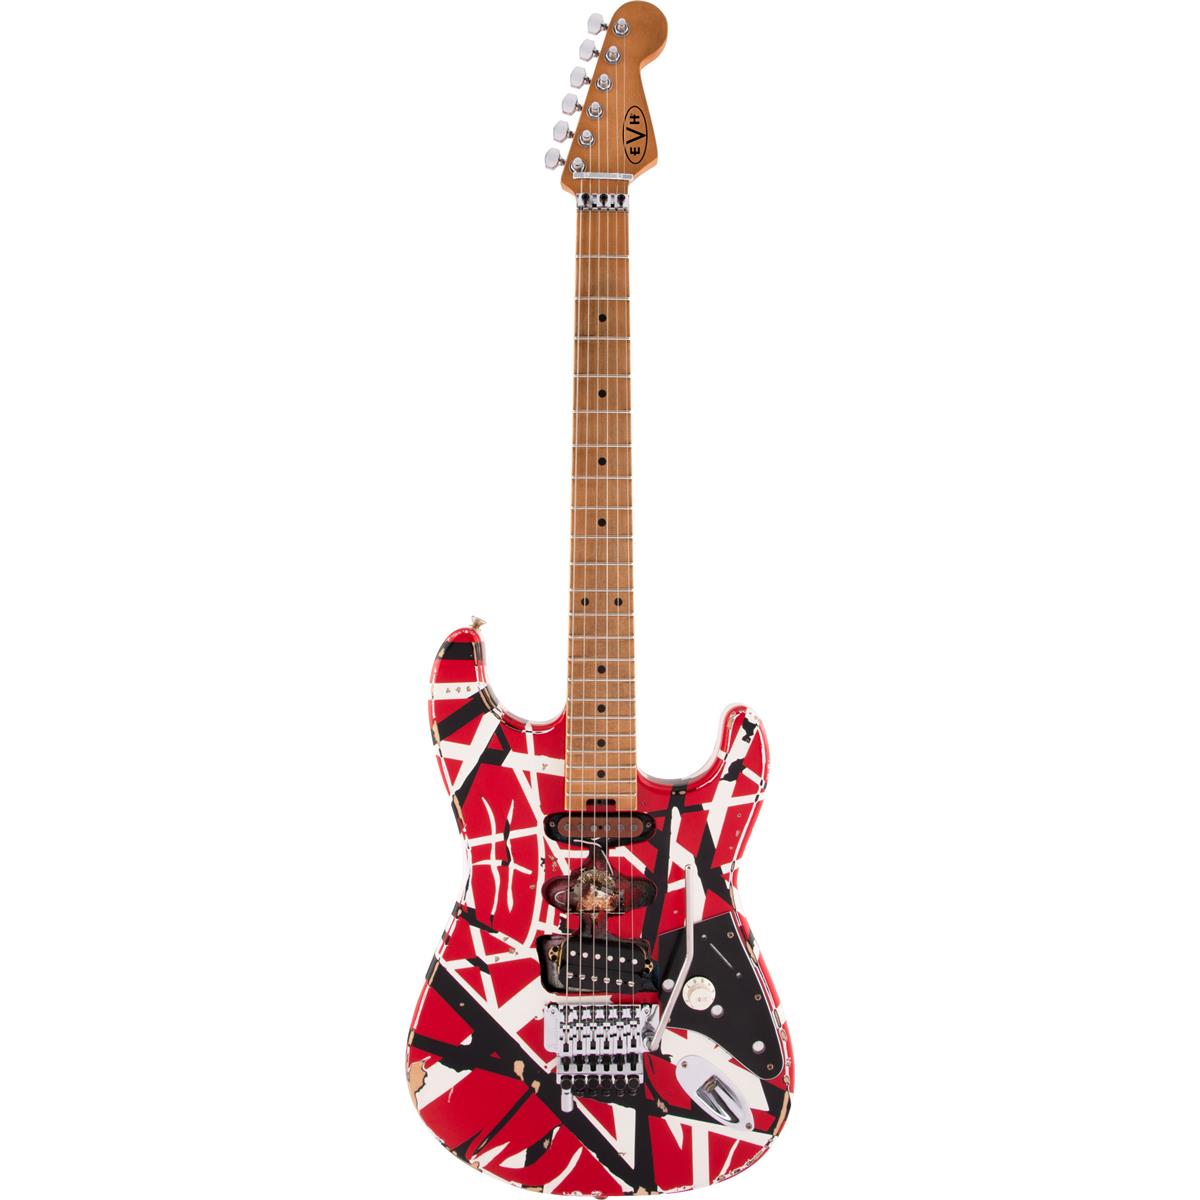 EVH Striped Series Frankie Electric Guitar (Red/White/Black Relic) $1349 + free s/h